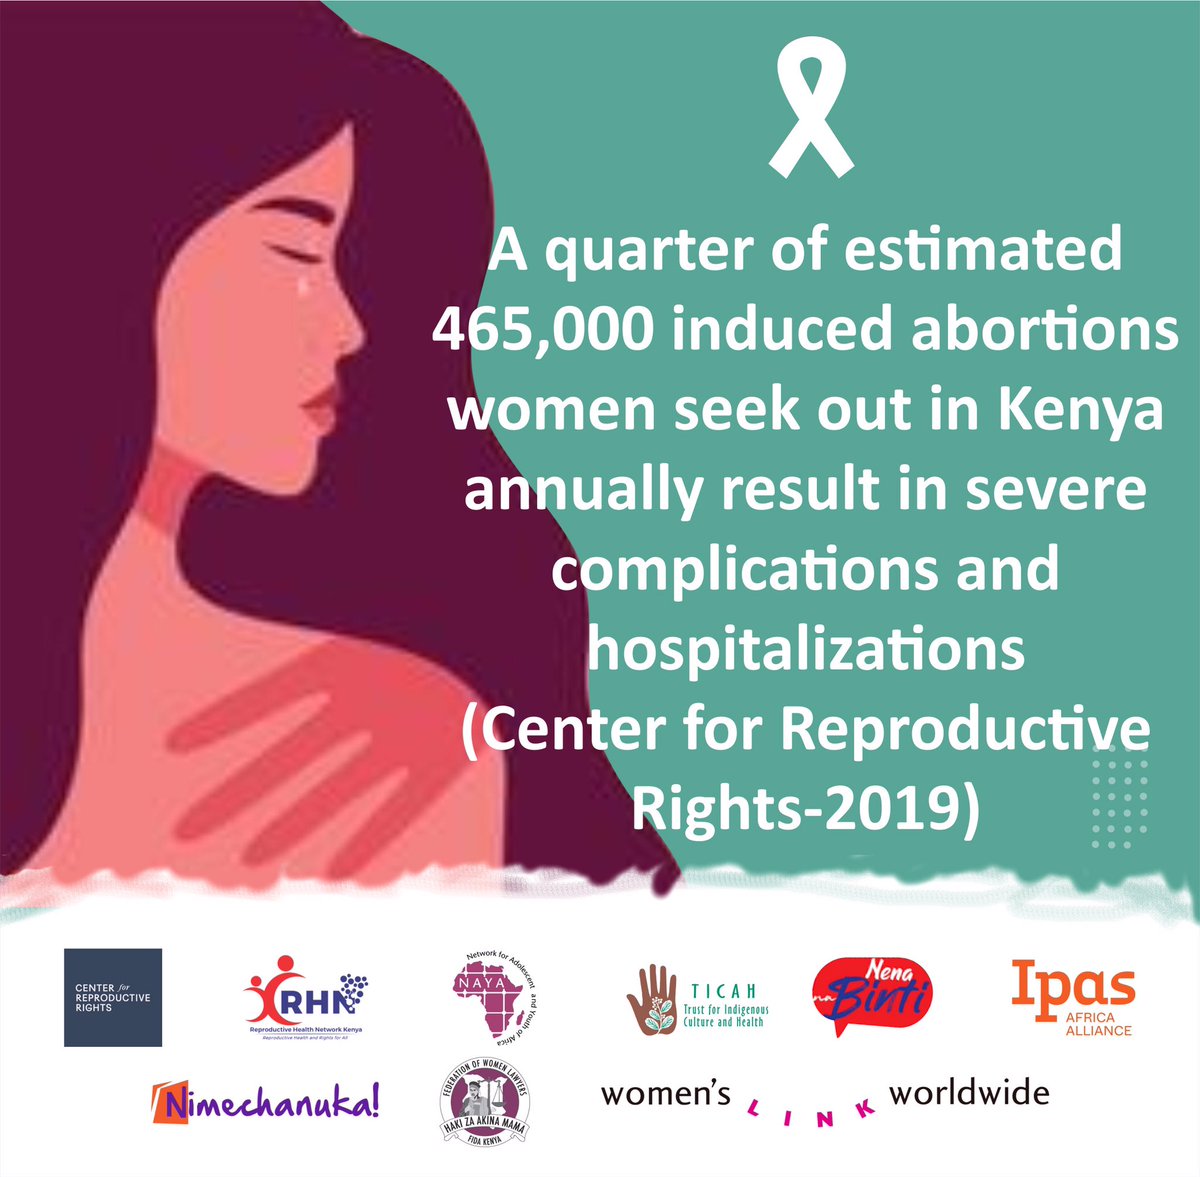 According to a 2019 report by @ReproRights , a quarter of estimated 465,000 induced abortions women seek out in Kenya annually result in severe complications and hospitalisations. @womenslink @fidakenya @ReproRights @NAYAKenya @TICAH_KE @IpasOrg @aphrc #DefendHerRightsKE